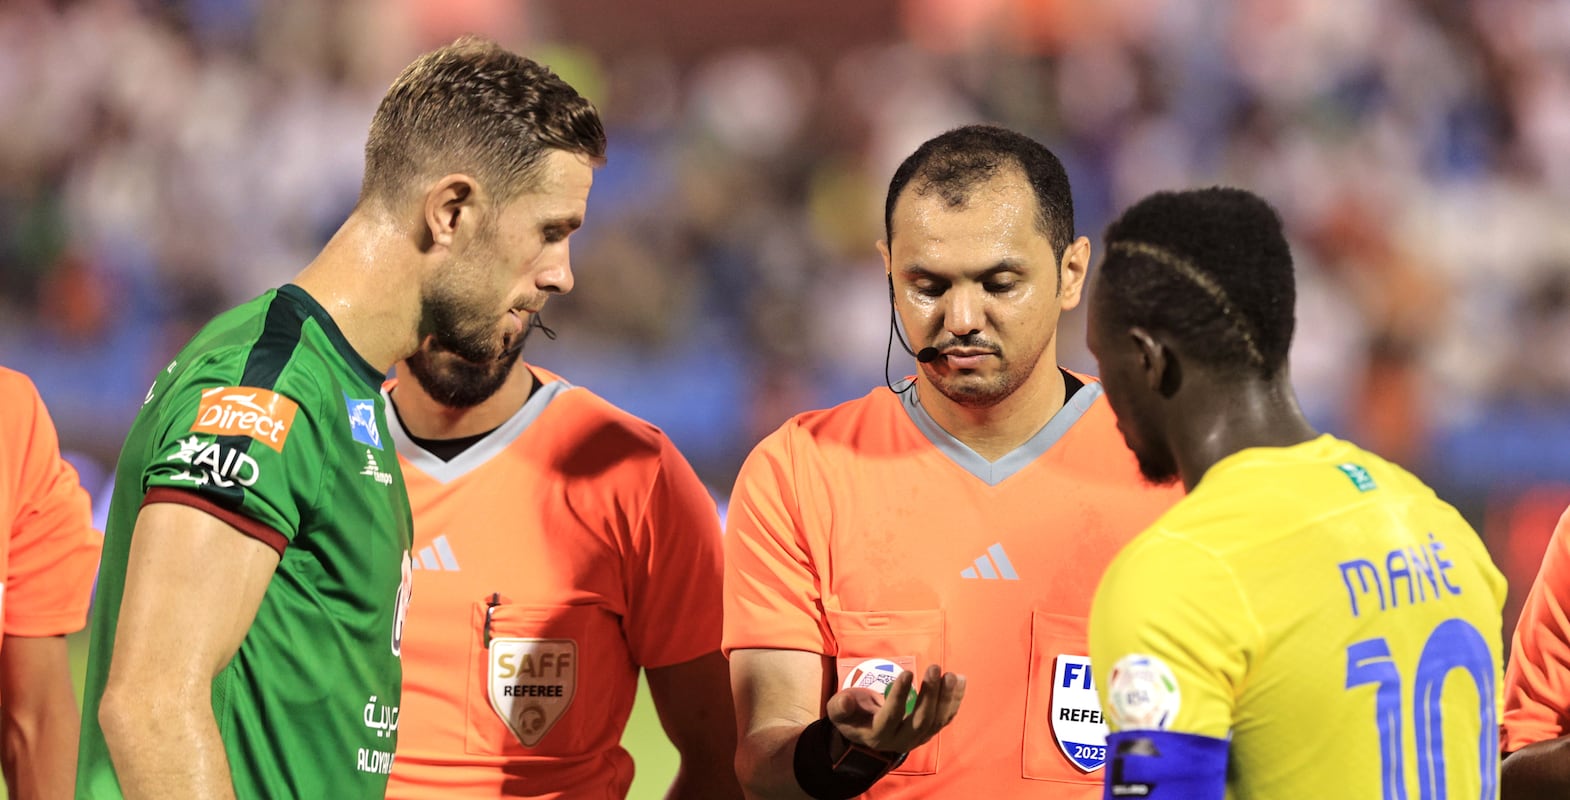 AD DAMMAM, SAUDI ARABIA - AUGUST 14: Jordan Henderson of Al-Ettifaq and Sadio Mane of Al-Nassr take part in the coin toss with match referee Mohammed Al Hoaish prior to the Saudi Pro League match between Al-Ettifaq and Al Nassr at Prince Mohamed bin Fahd Stadium on August 14, 2023 in Ad Dammam, Saudi Arabia. (Photo by Essa Doubisi / Getty Images)